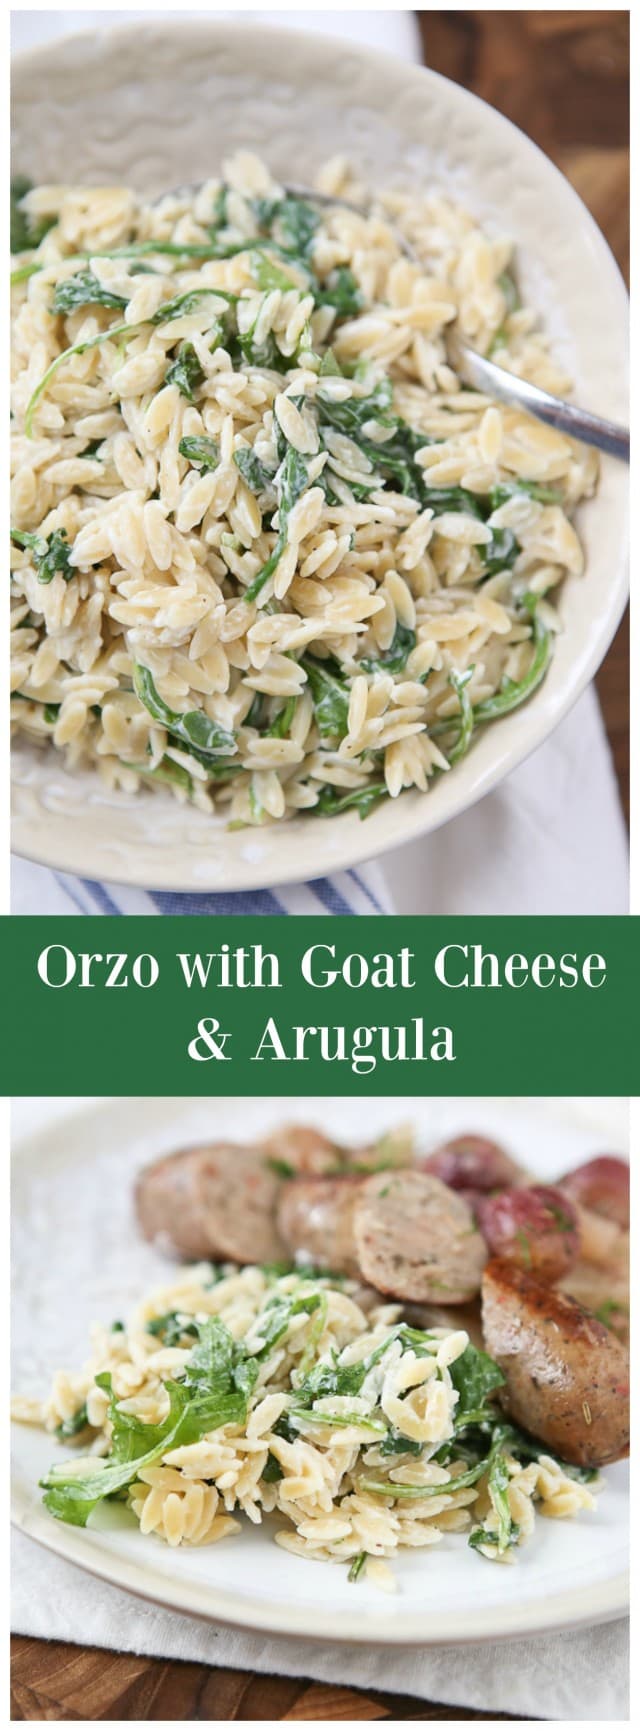 Orzo with Goat Cheese and Arugula from aggieskitchen.com - my family loves when I make this pasta side dish!